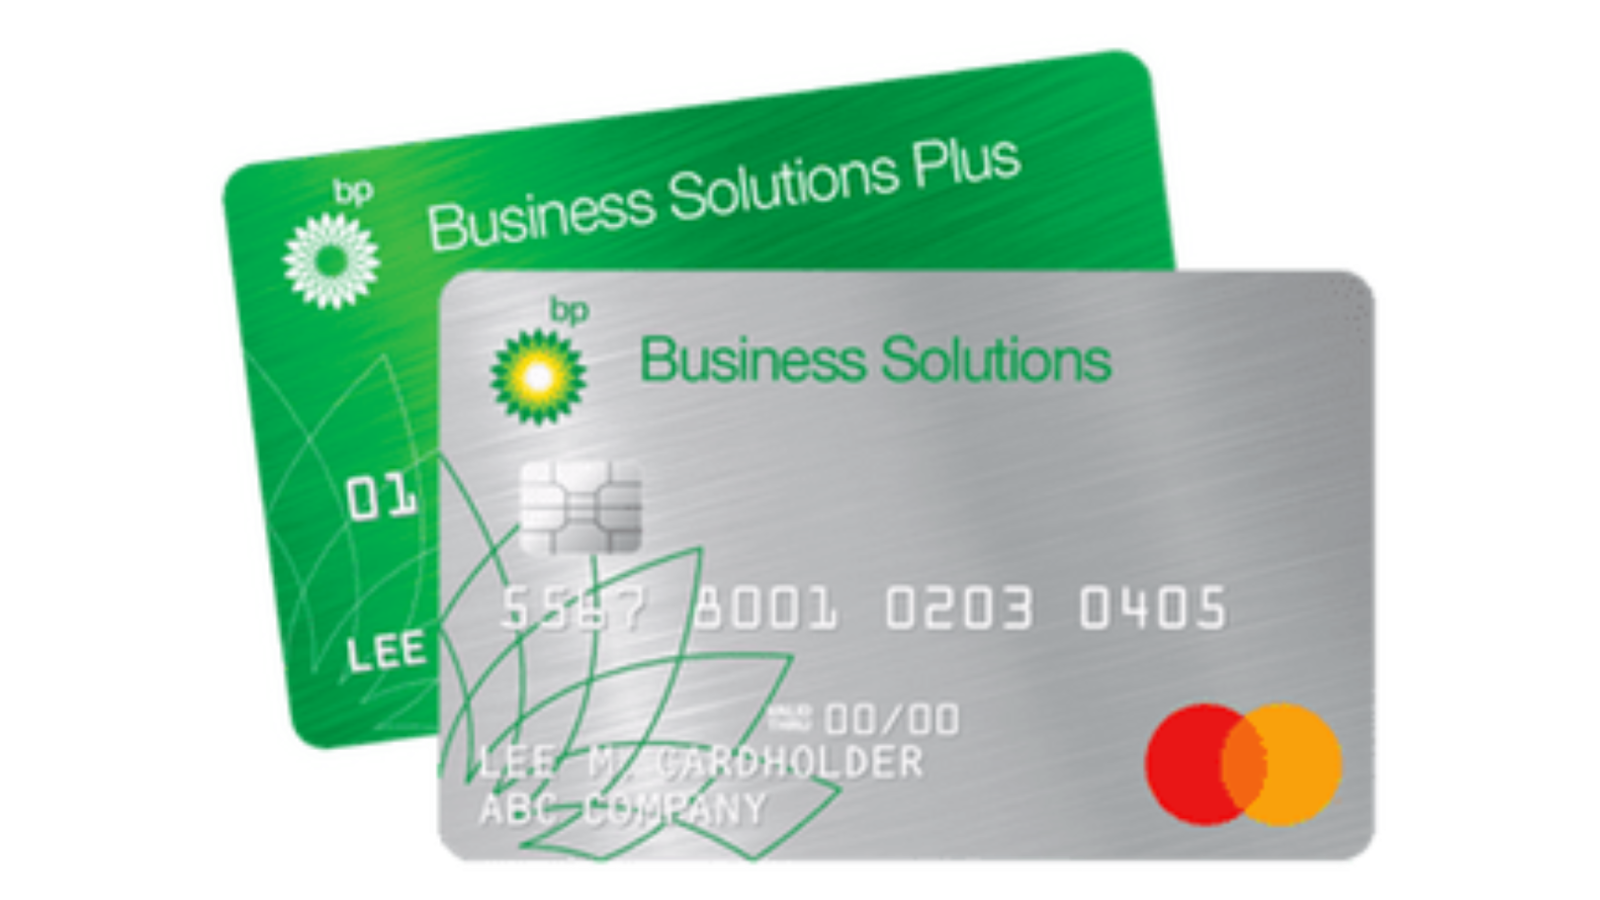 BP business gas cards